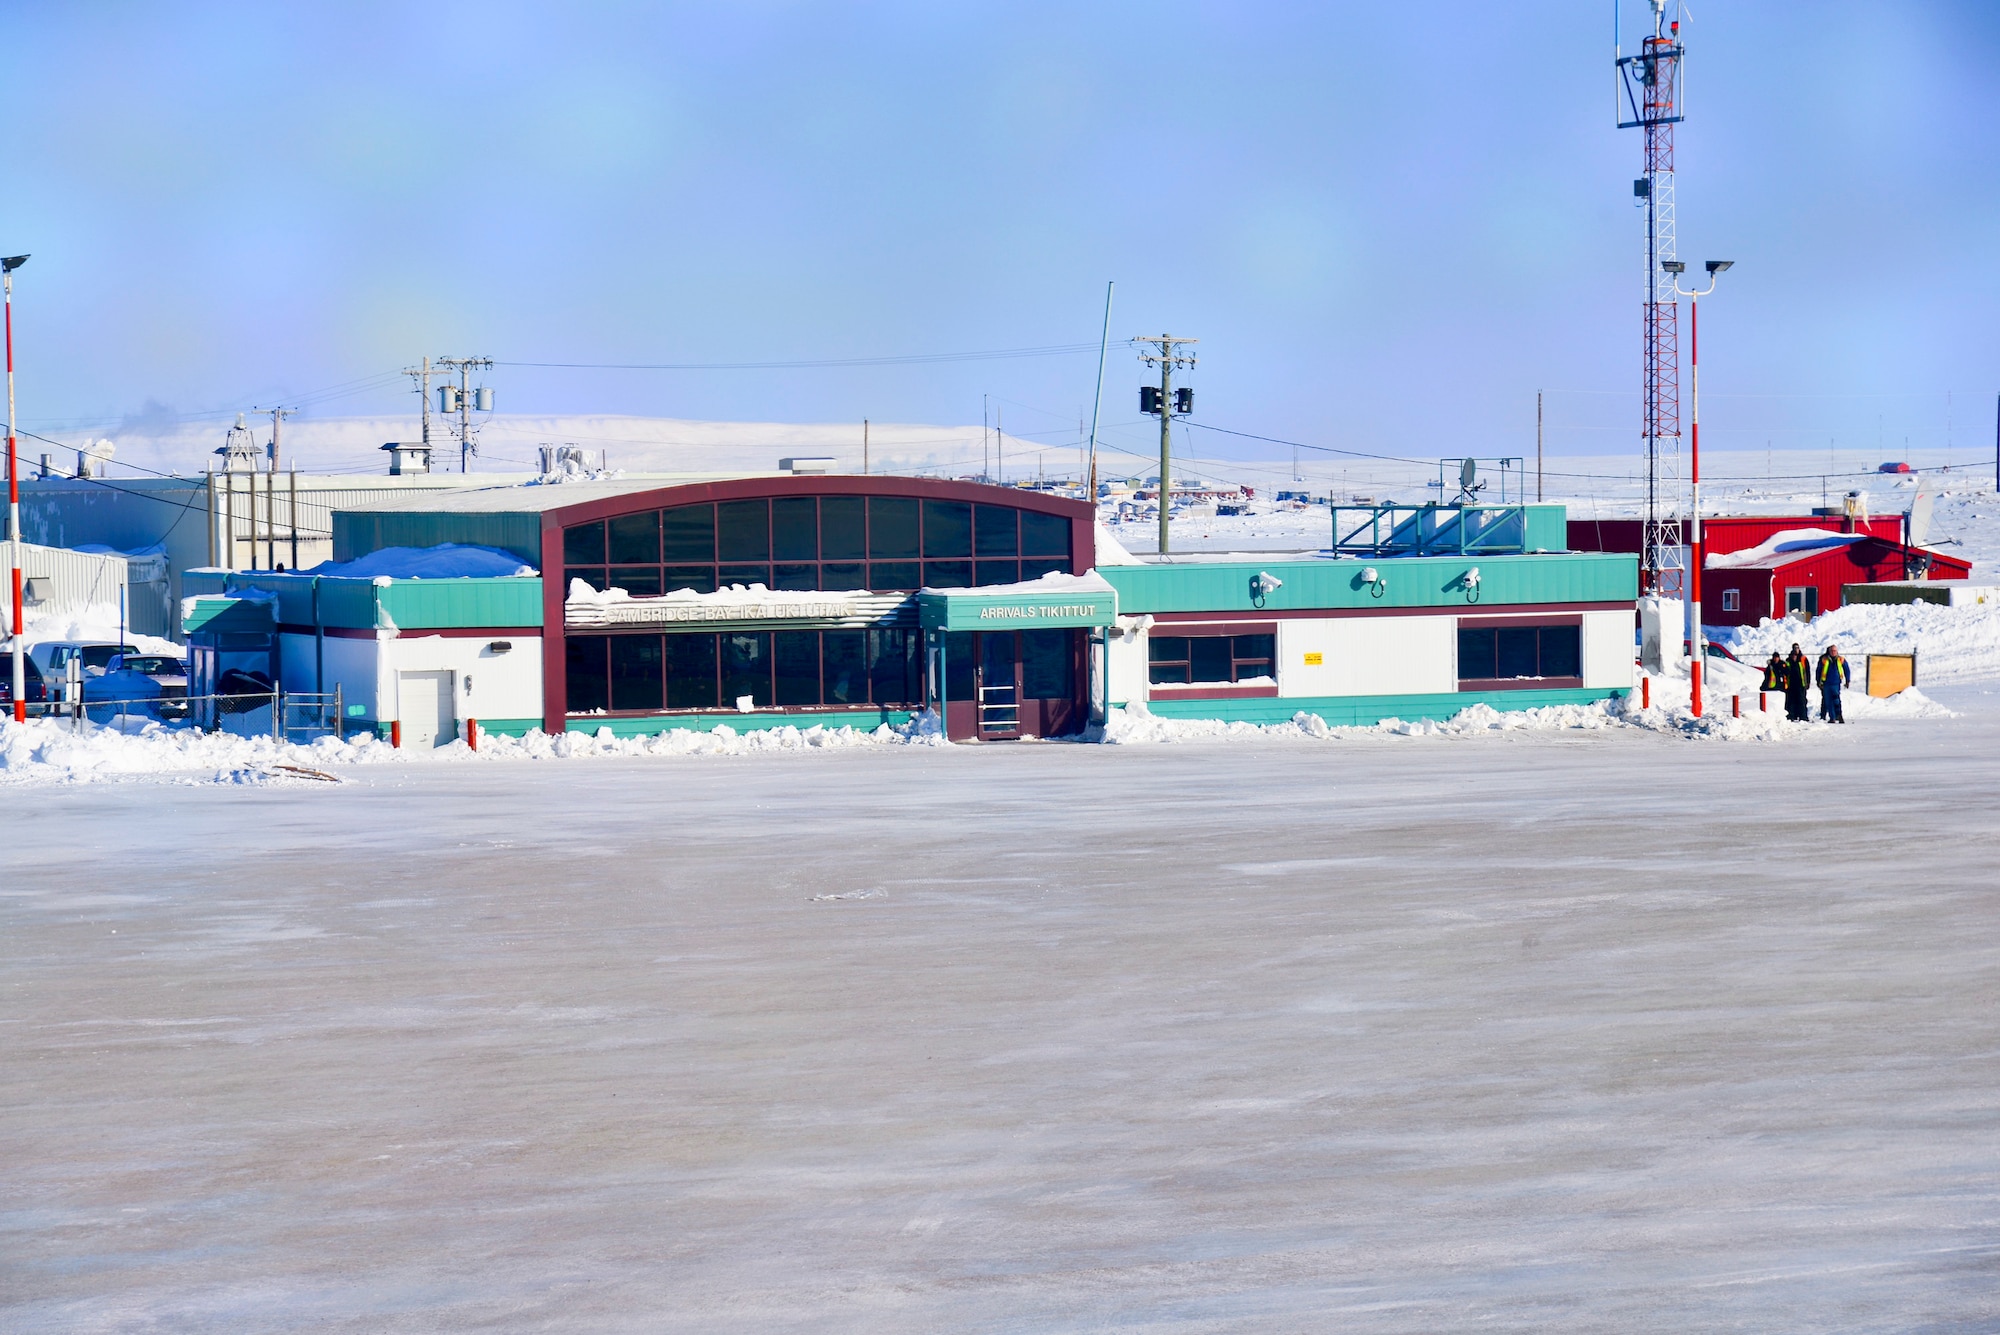 A view of the airport terminal at Cambridge Bay, Nunavut, Canada, March 23, 2015. Members of the New York Air National Guard's 105th Airlift Wing flew supplies into the Canadian Arctic in on board a C-17 in support of the New York Air National Guard's 109th Airlift Wing which is participating in the Canadian Forces Operation NUNALIVUT 2015, an annual exercise in the high Arctic. ( U.S. Air National Guard photo by Maj. Ryan Daughtery/Released)


